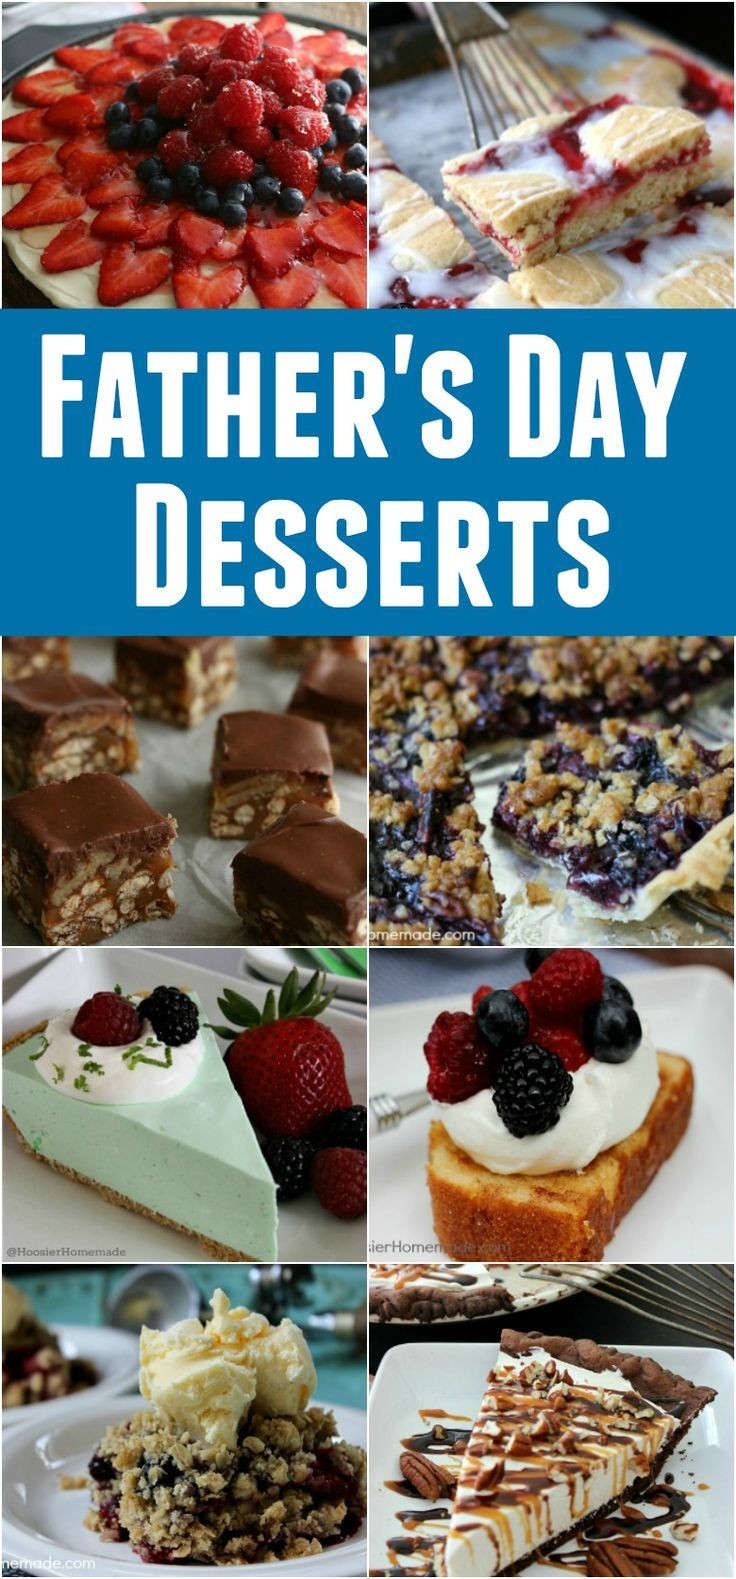 Free Fathers Day Food
 17 Best images about Father s Day on Pinterest